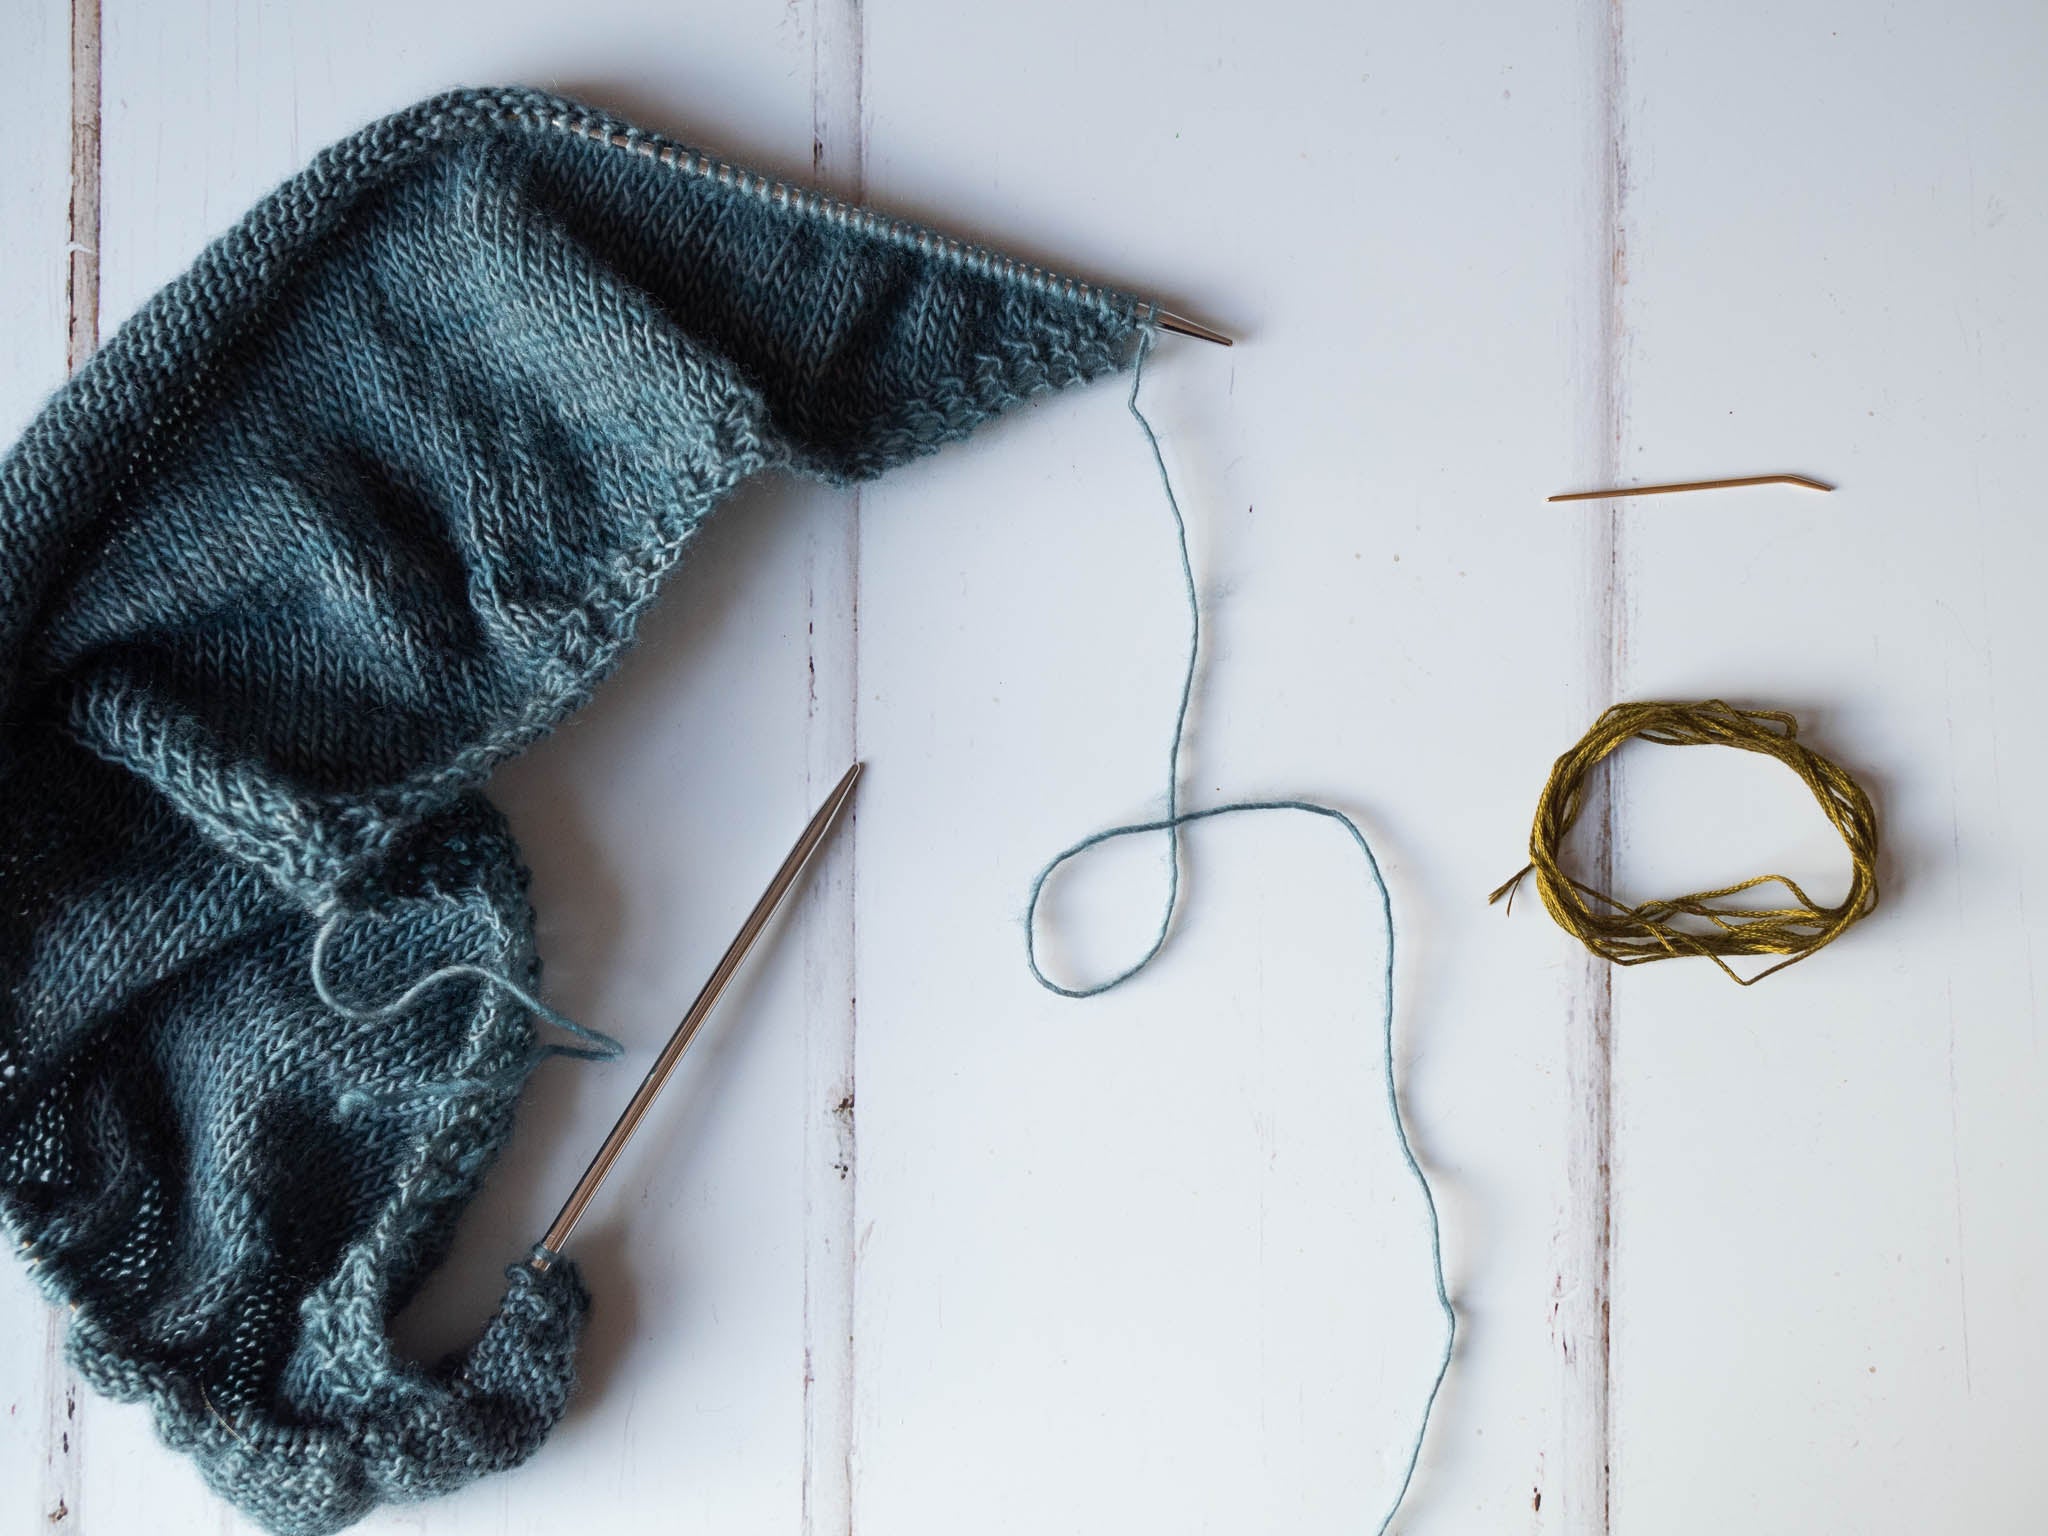 Identifying and fixing mistakes in lace knitting - Ysolda Ltd